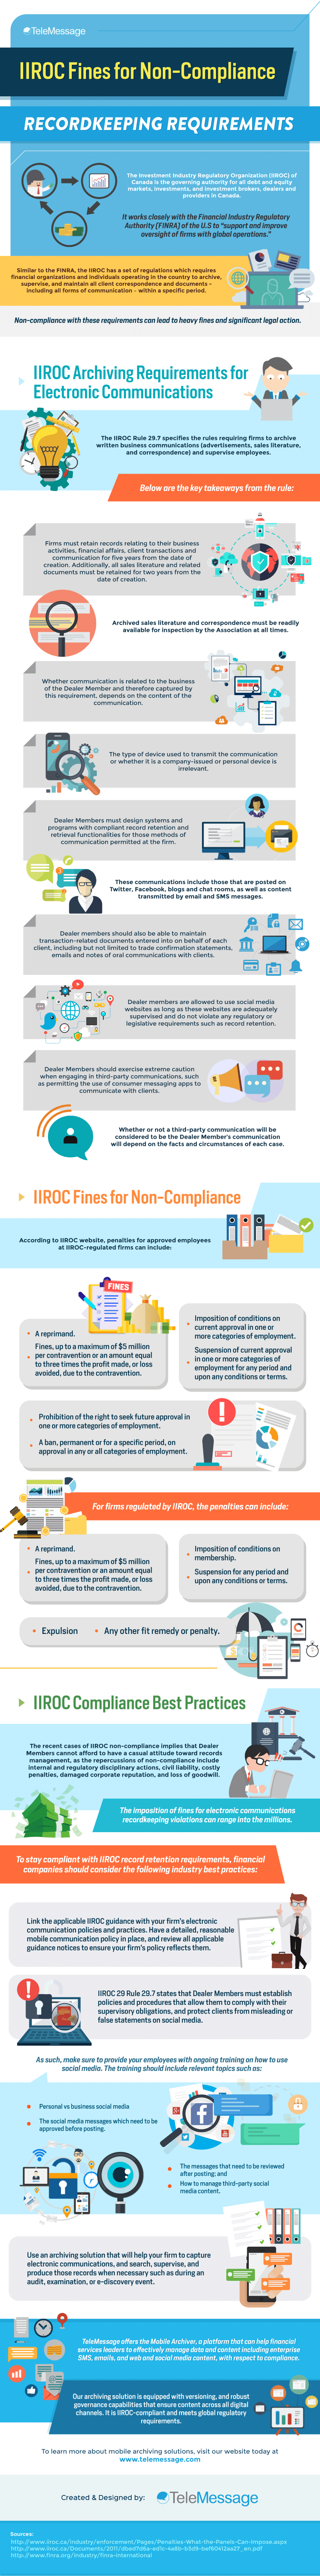 IIROC Fines for Non-Compliance with its Recordkeeping Requirements